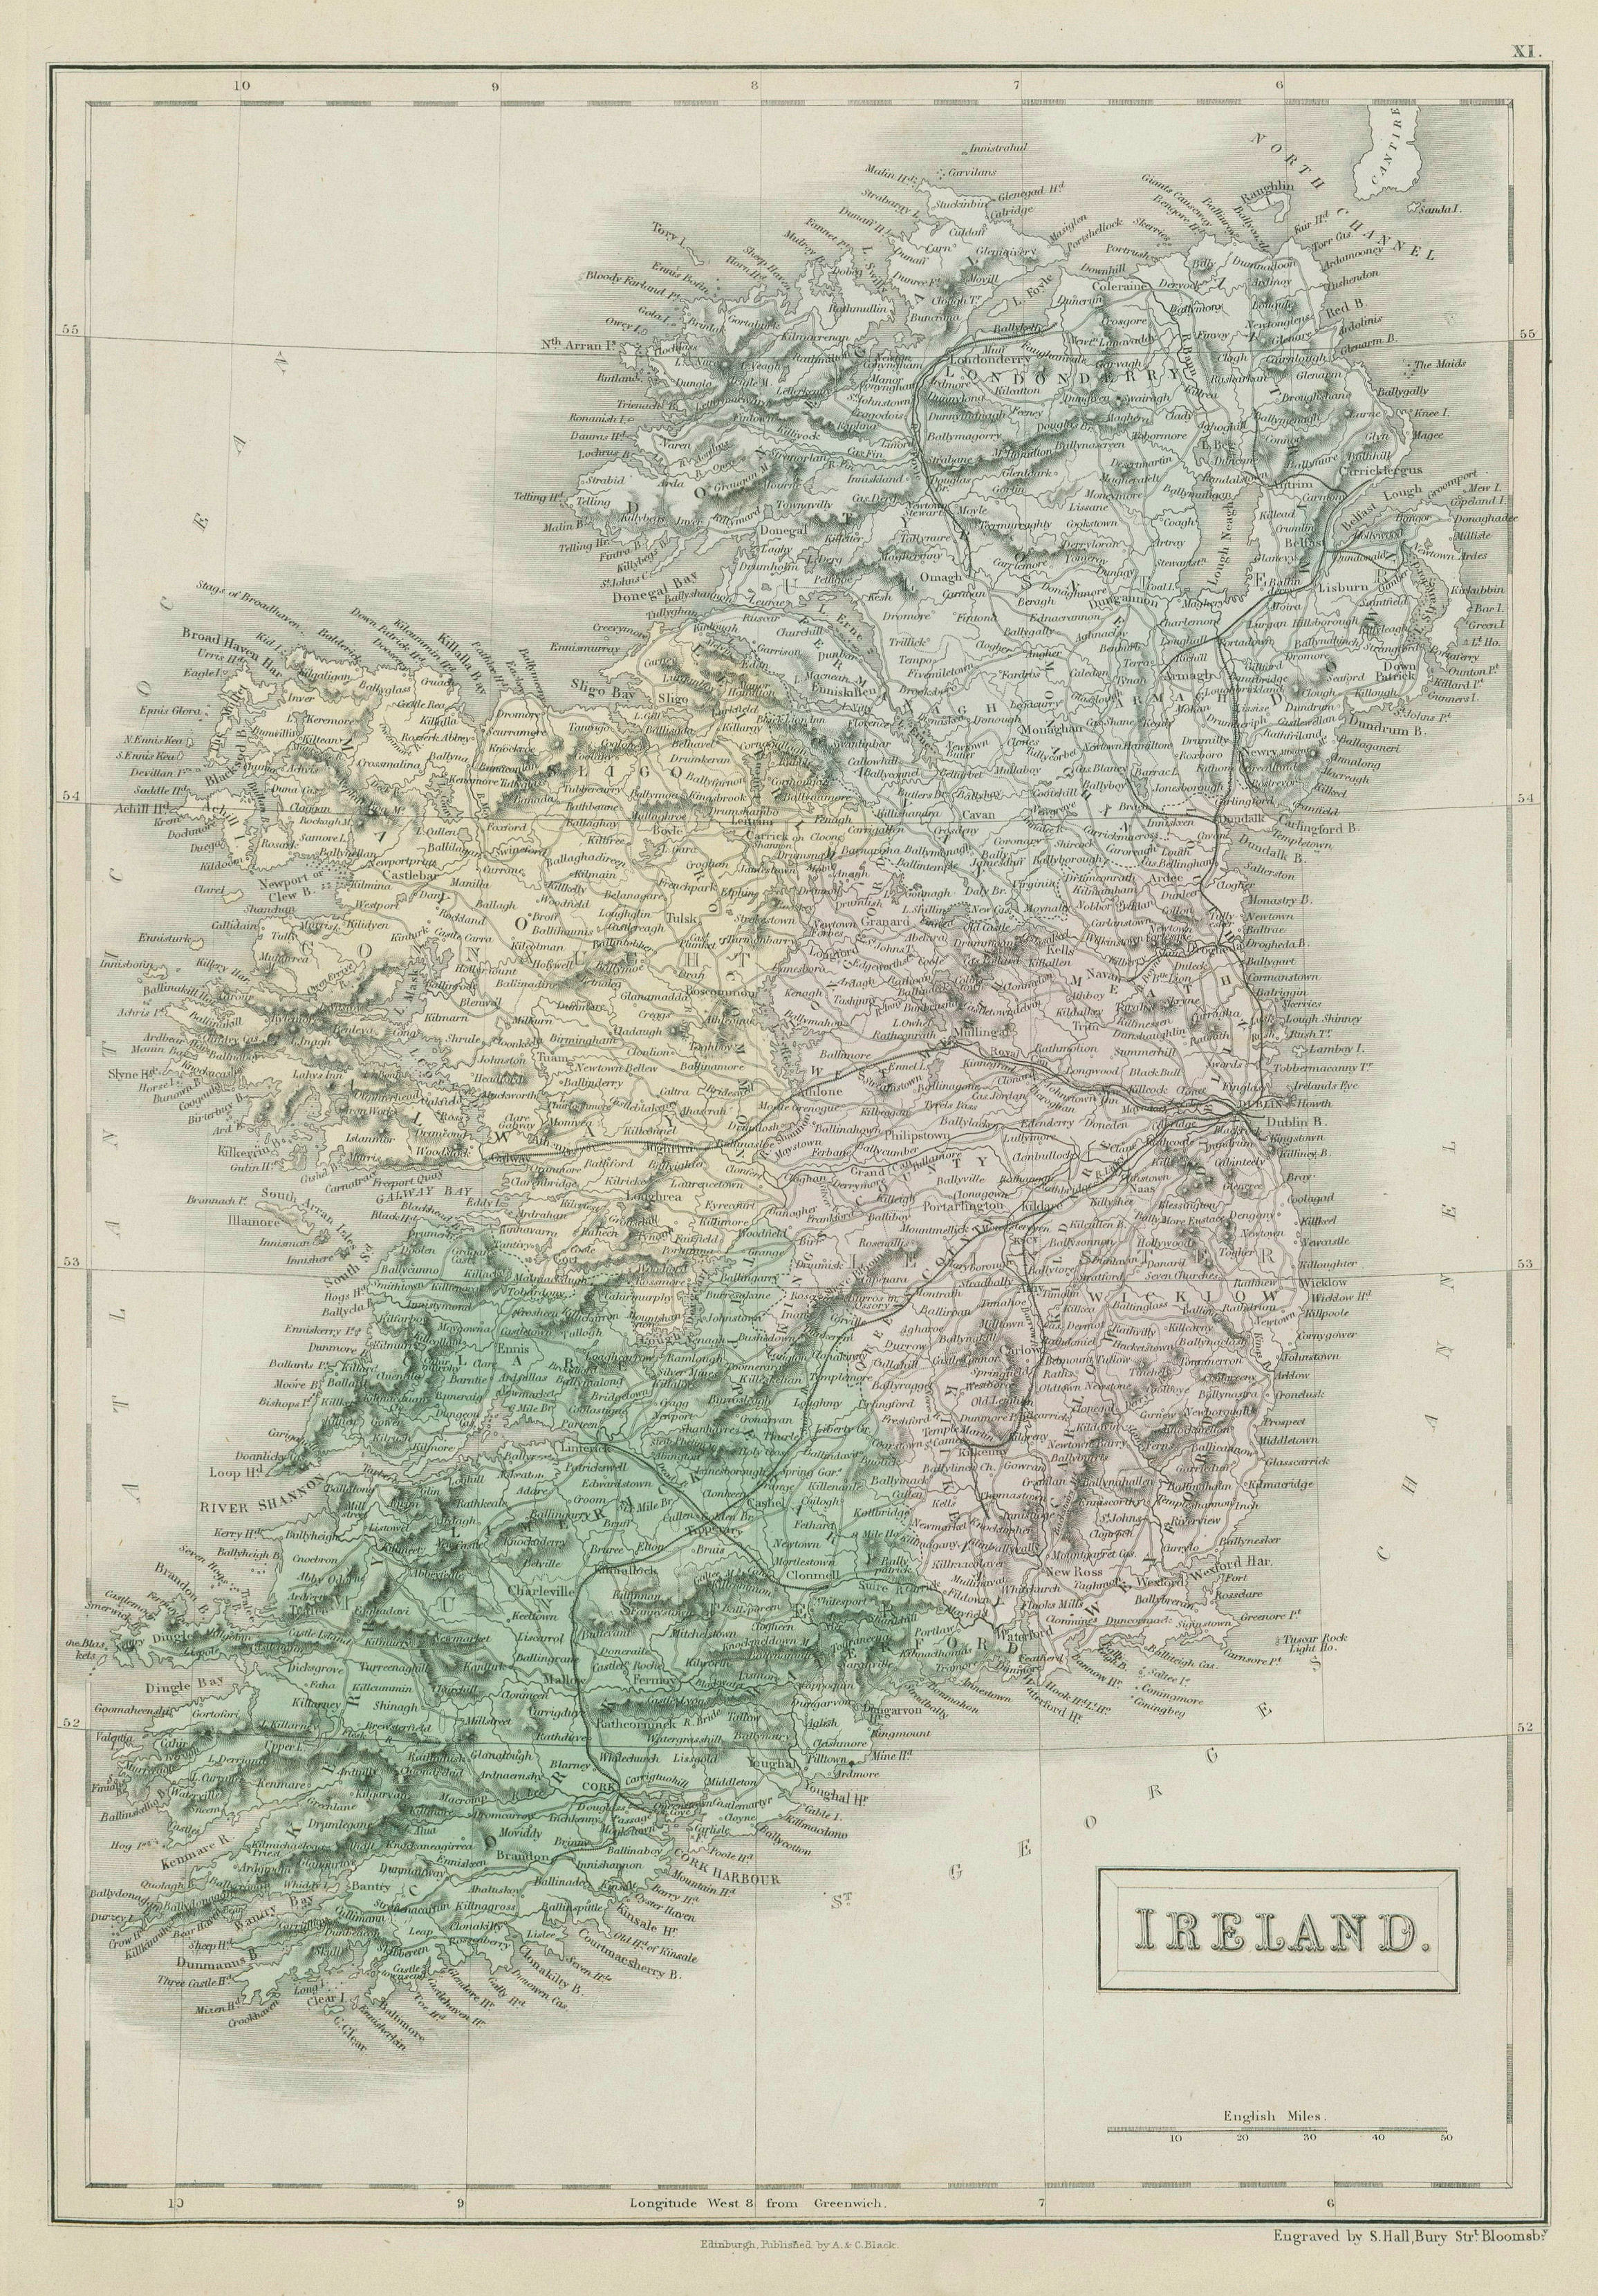 Associate Product Ireland showing provinces & railways by SIDNEY HALL 1856 old antique map chart